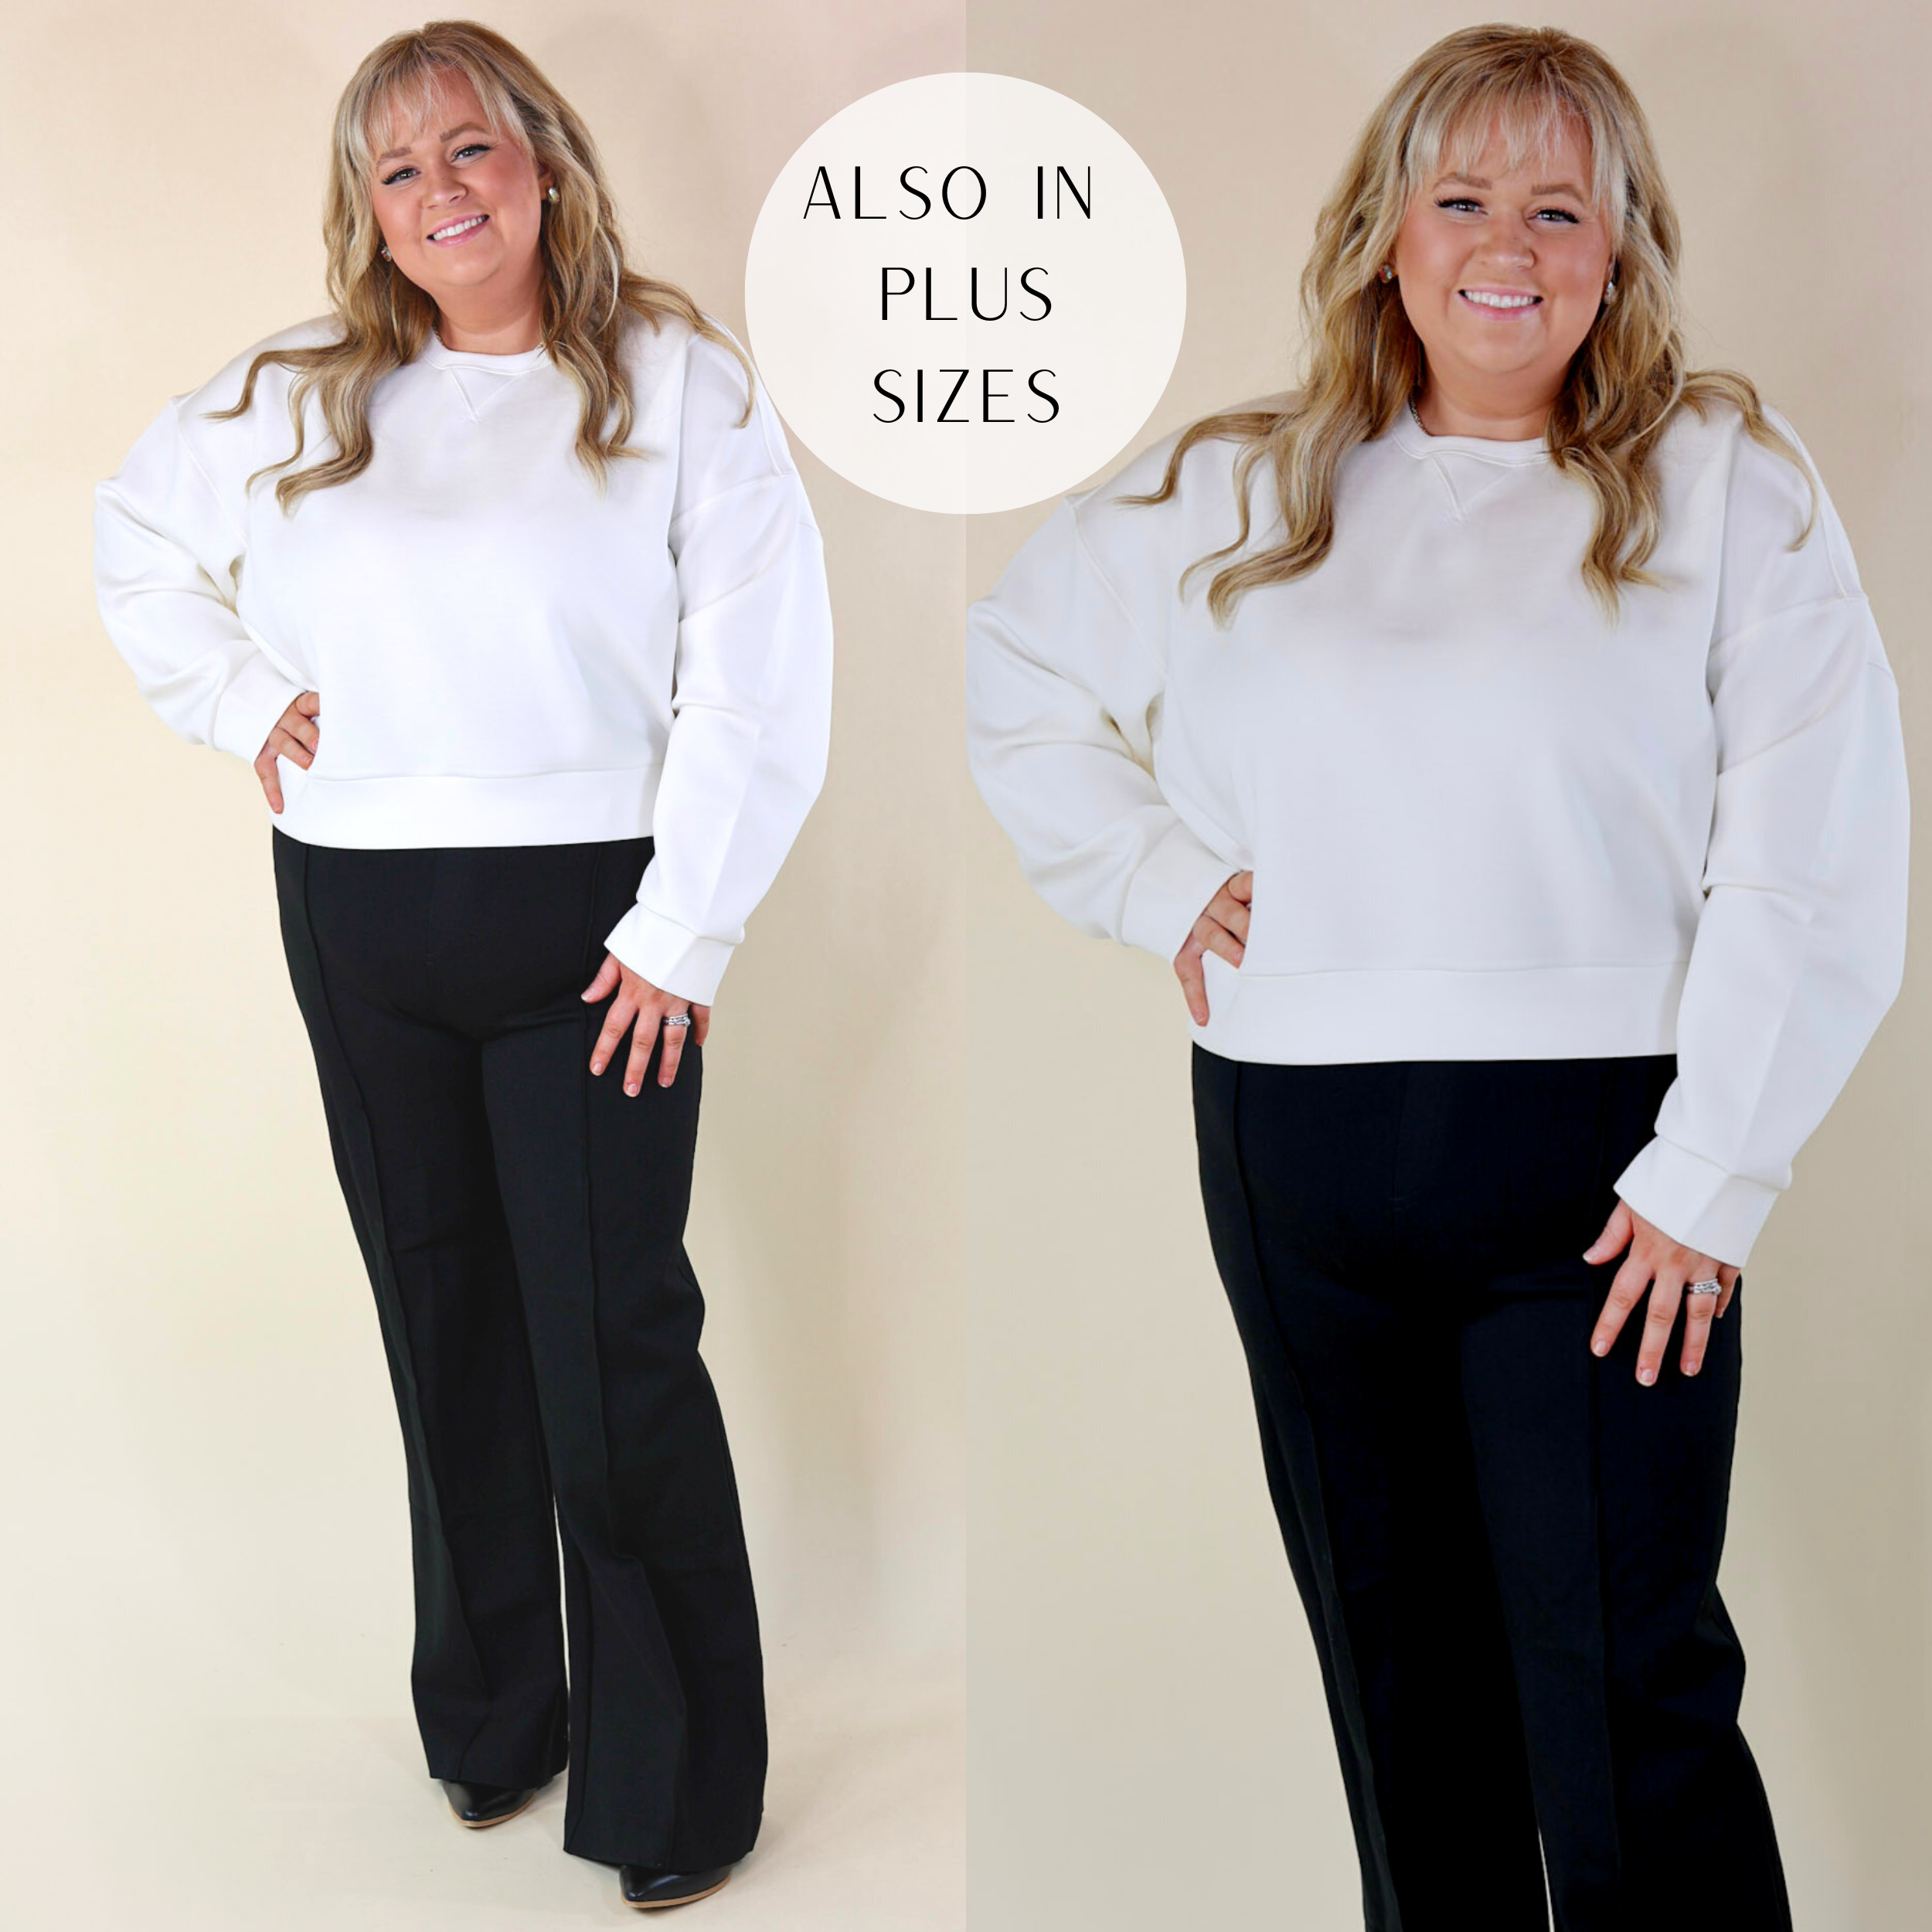 In the picture the model is wearing spanx airessentials crew neck pullover sweatshirt in a powder white color and has paired is with black pants and boots with a white background.